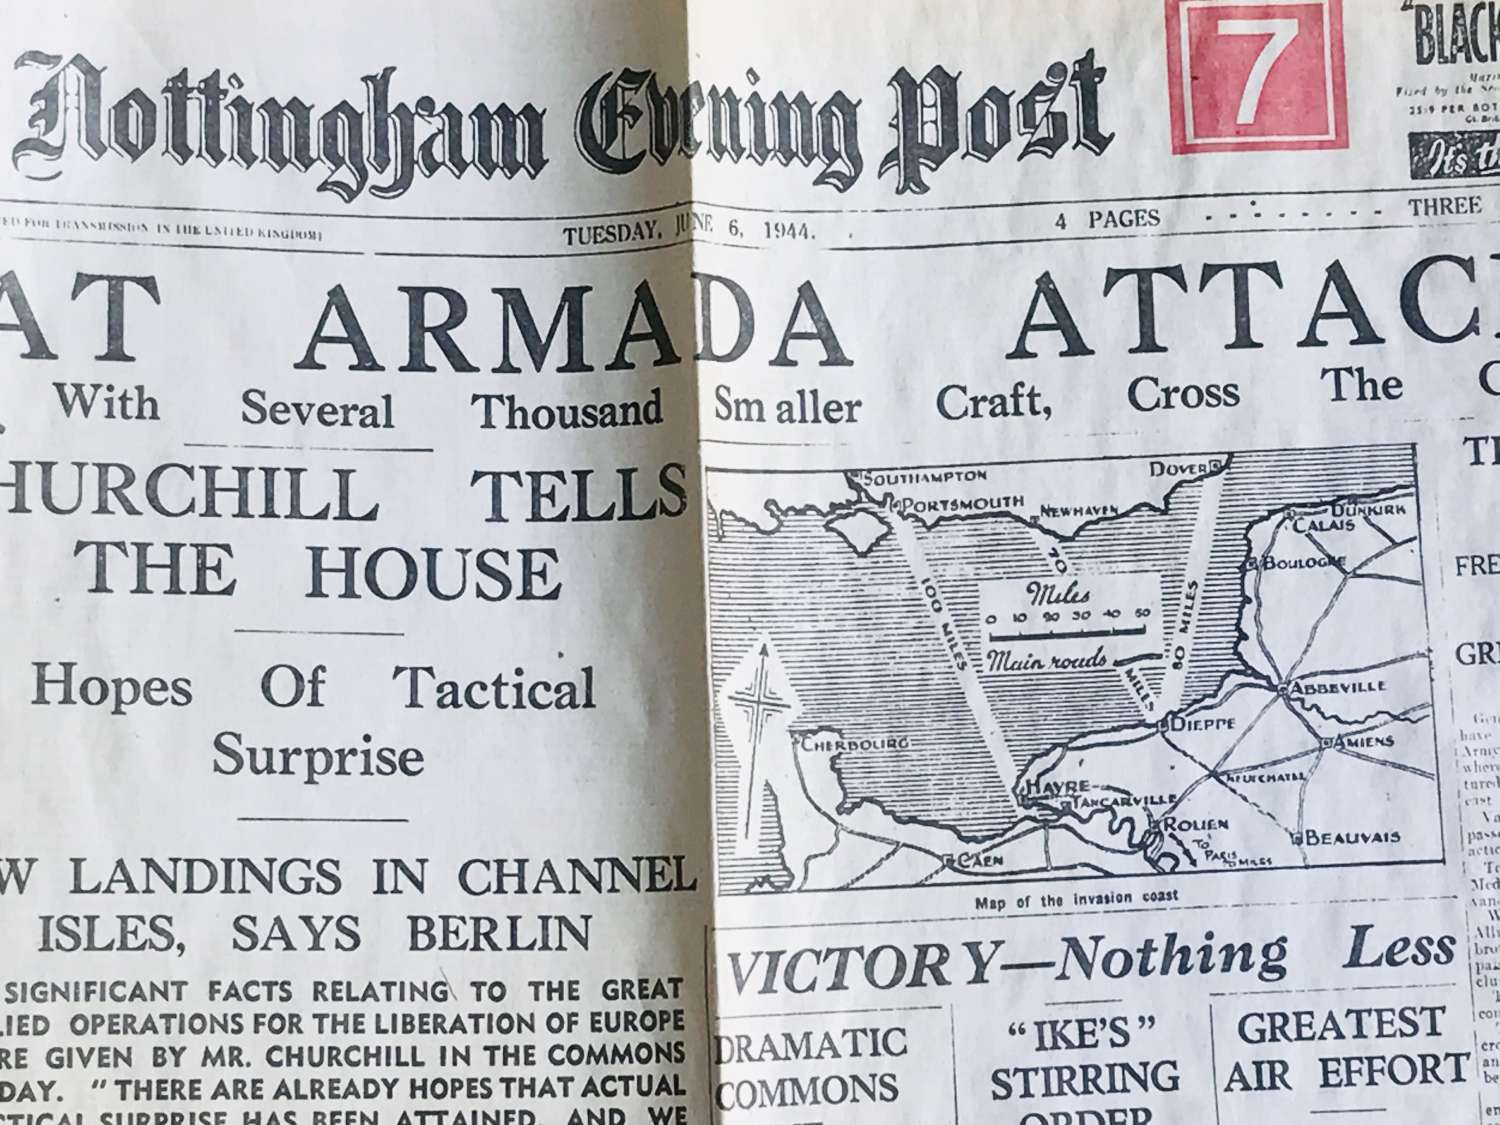 Nottinghamshire evening Post D-Day addition